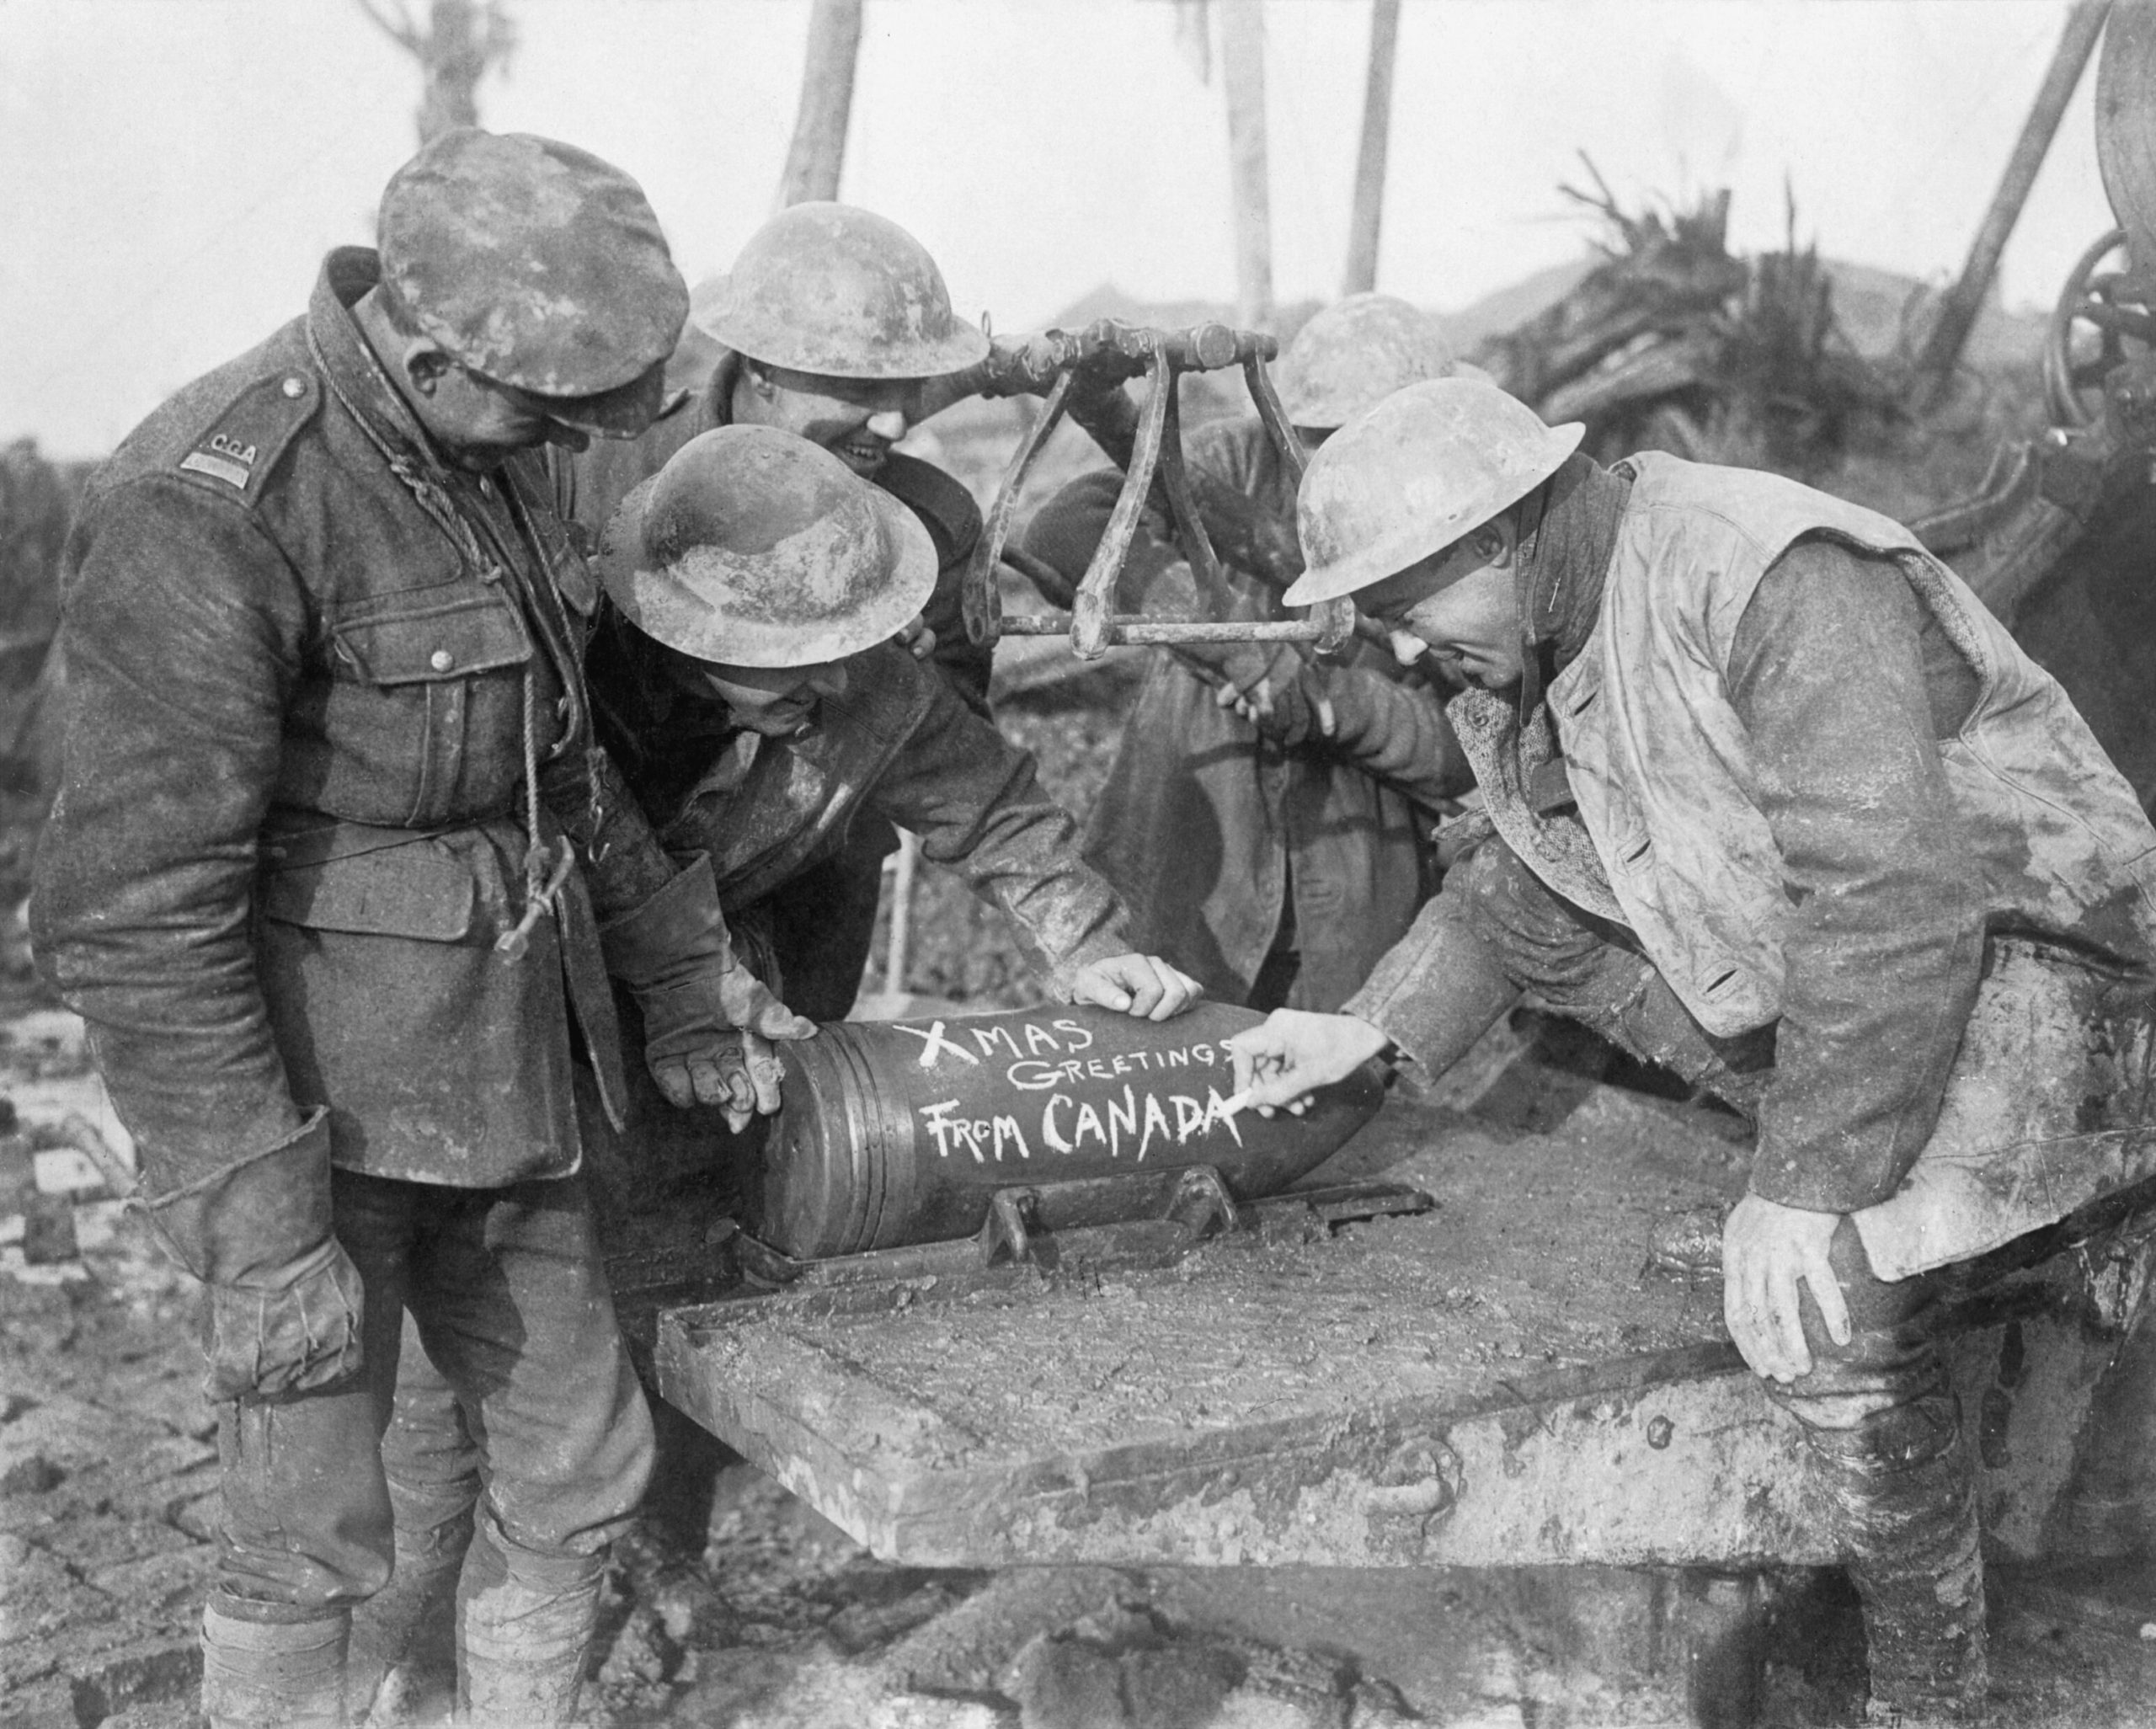 Canadian artillerymen with seasonal messages on an artillery shell during the Battle of the Somme.